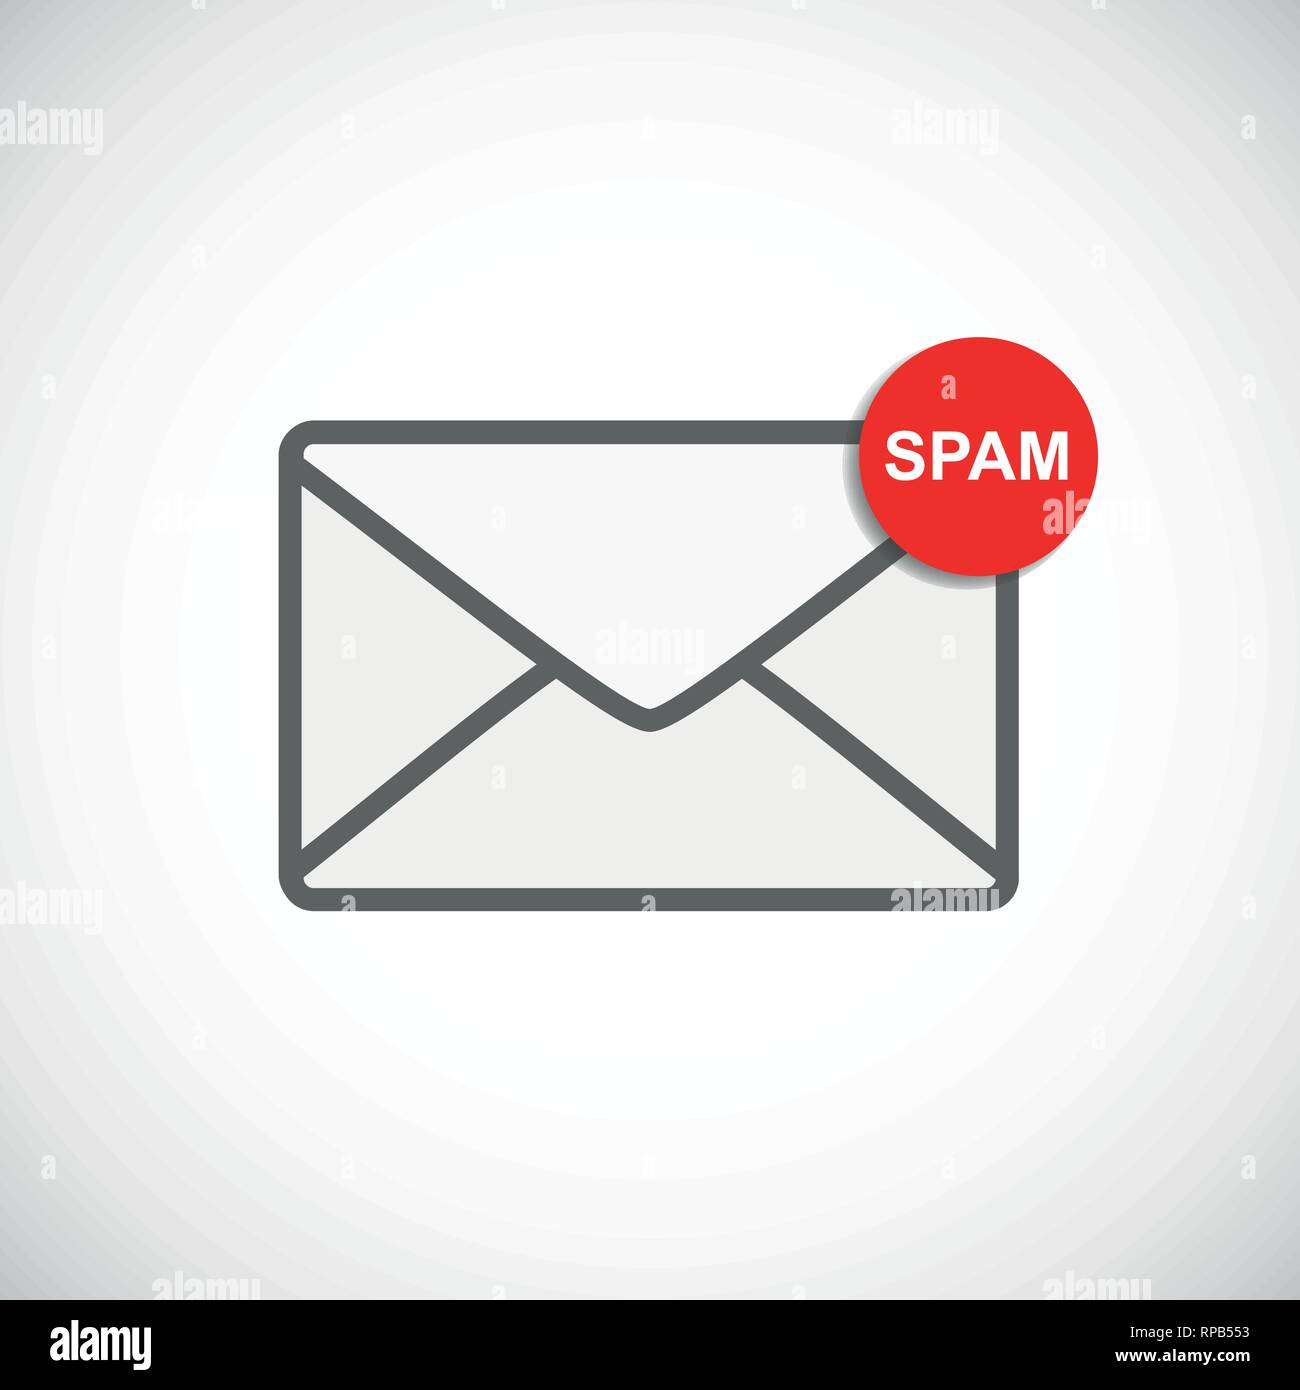 mail envelope icon with spam message vector illustration EPS10 Stock Vector